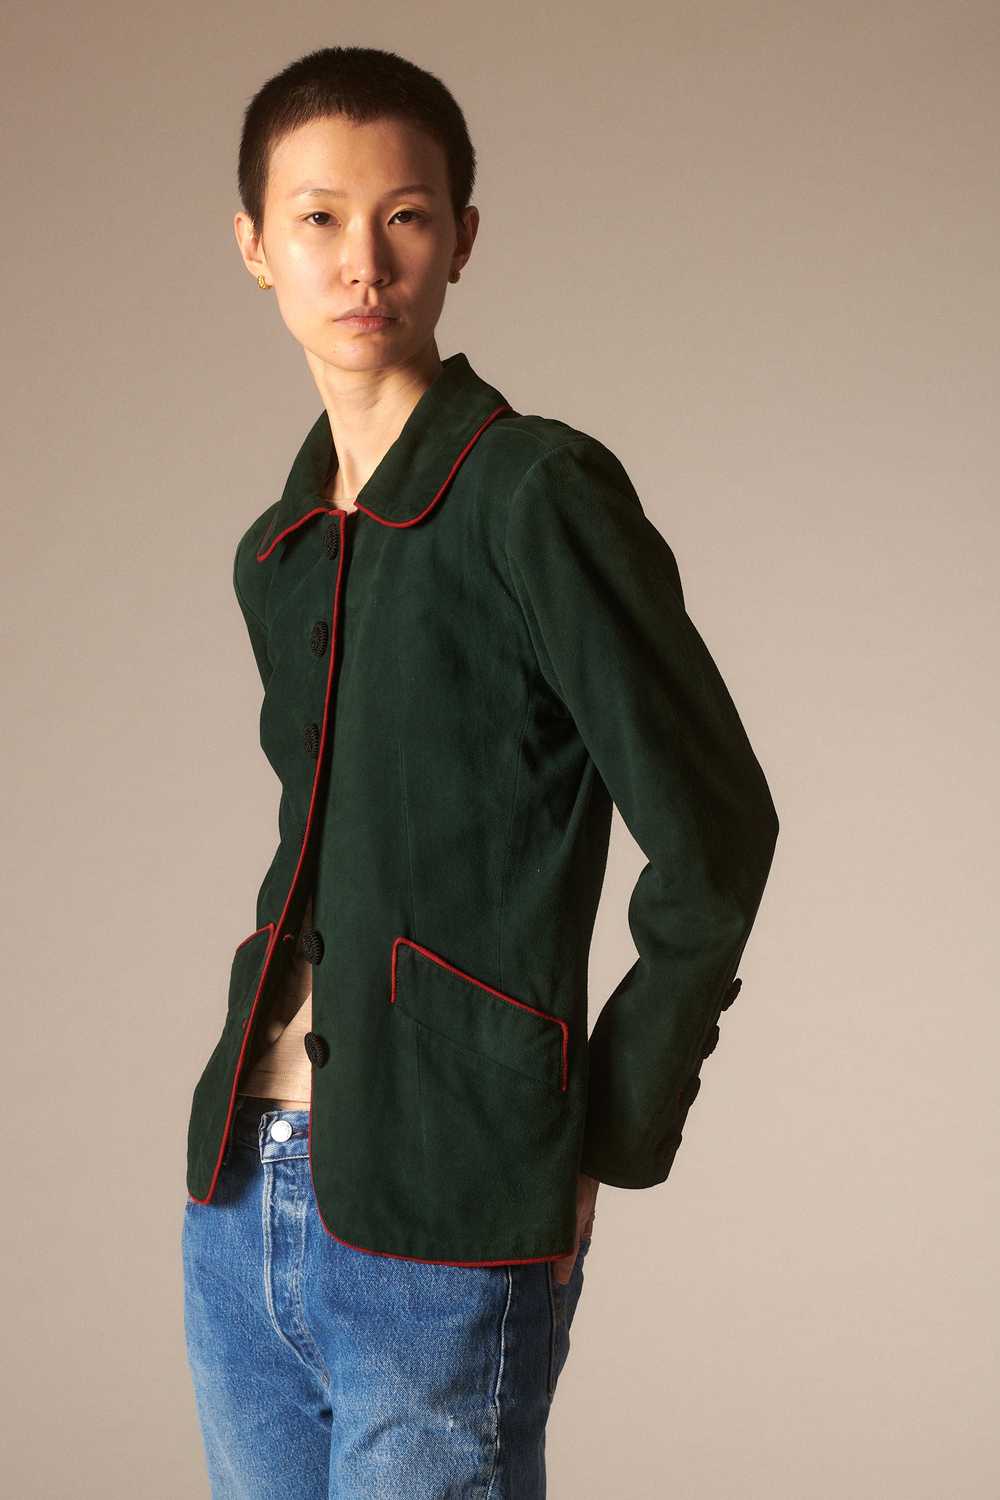 Ysl Suede Coat in Forest Green - image 2